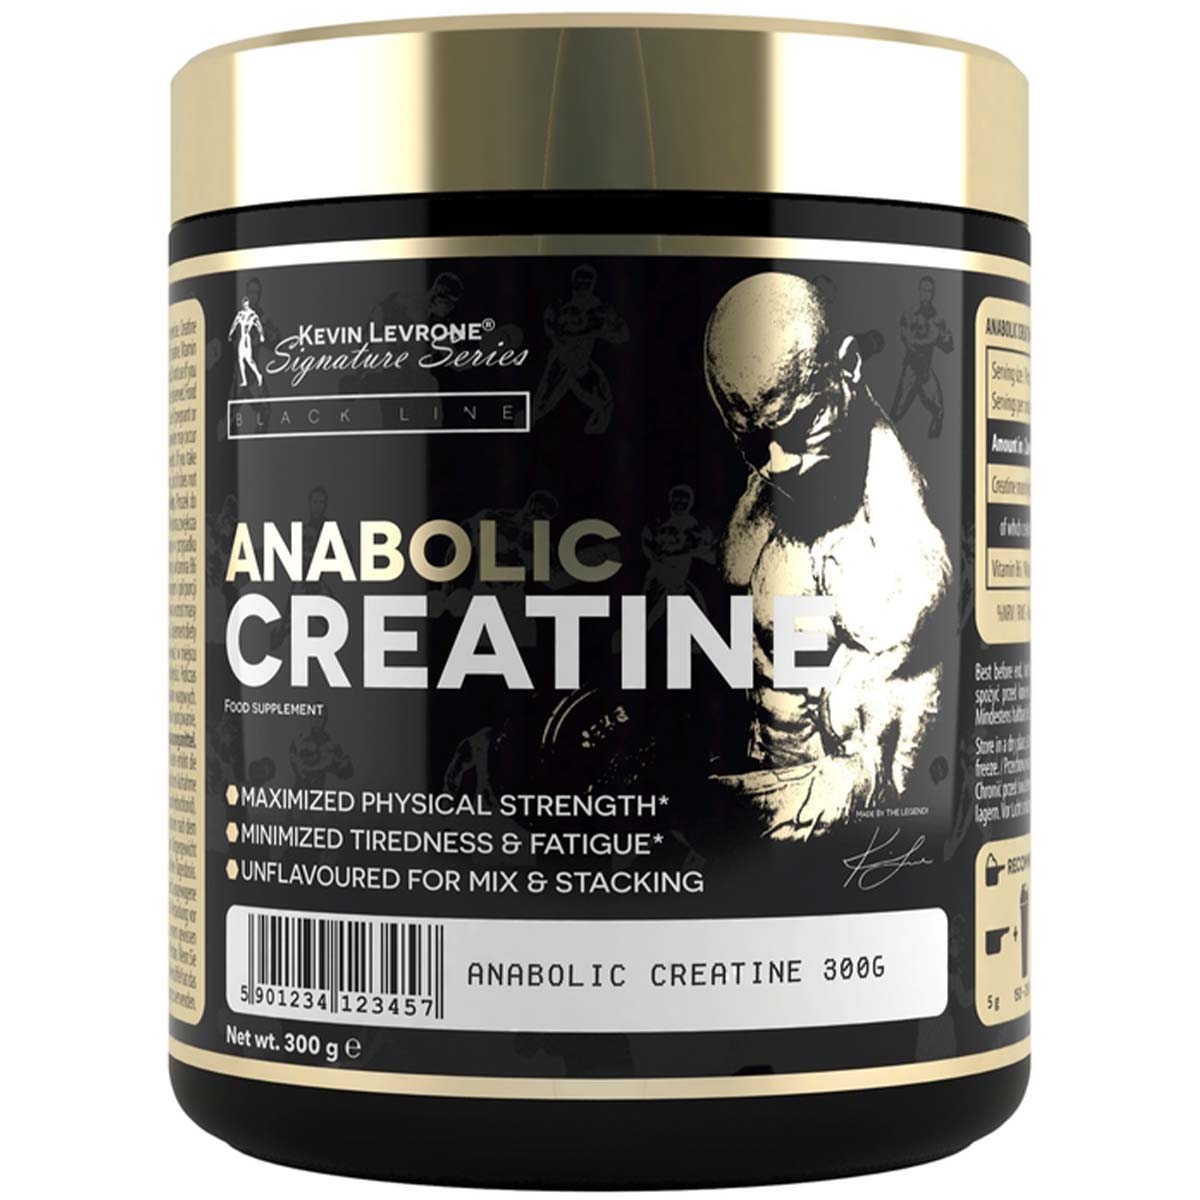 Kevin Levrone Anabolic Creatine 300 Gm Unflavored